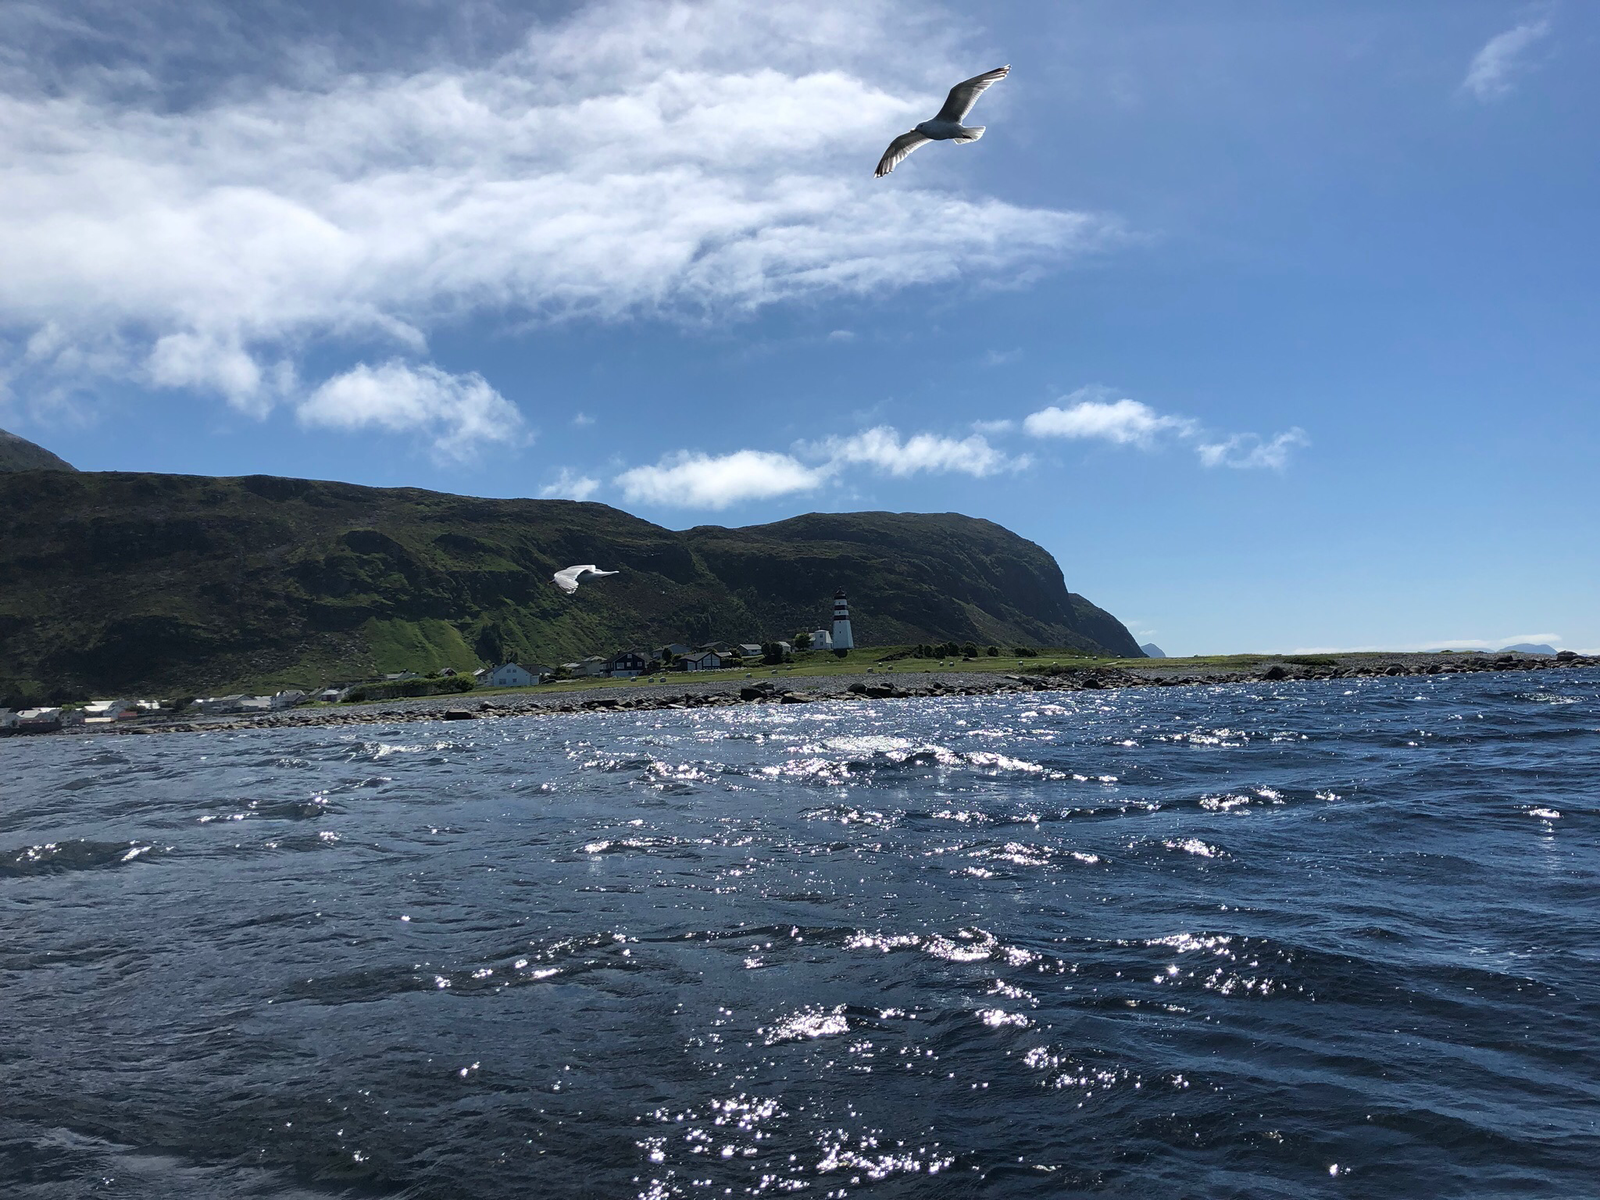 About fishing - My, Norway, Longpost, Fishing, Crab, Personal experience